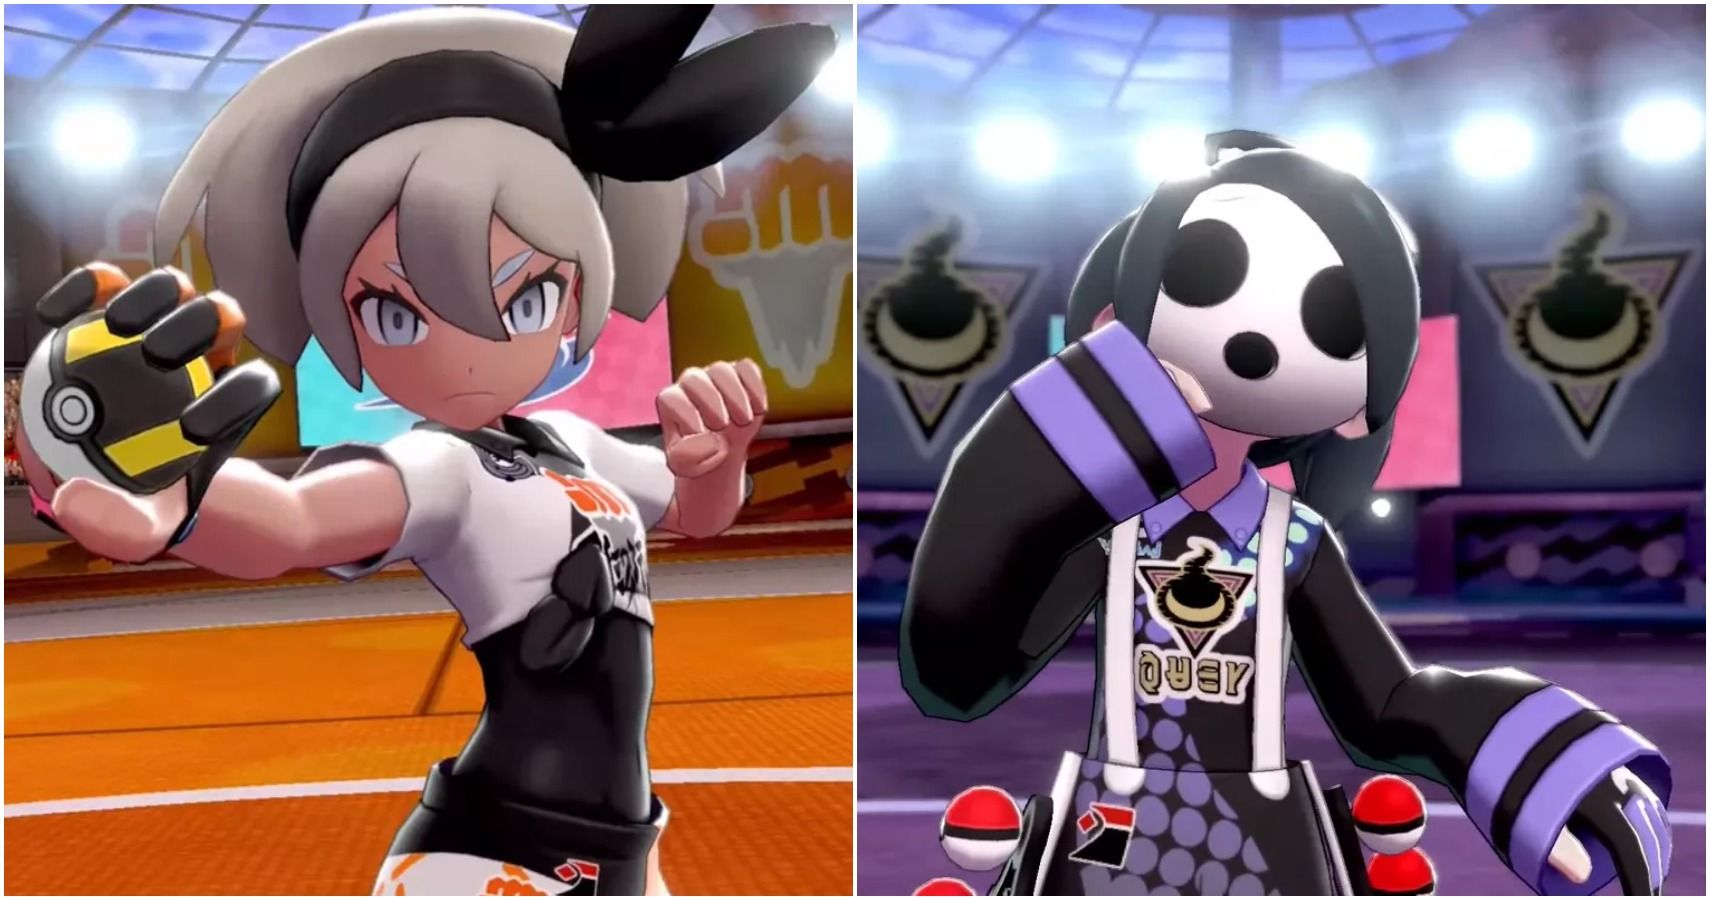 Allister is the Internet's New Favorite Gym Leader in 'Pokémon Sword and  Shield